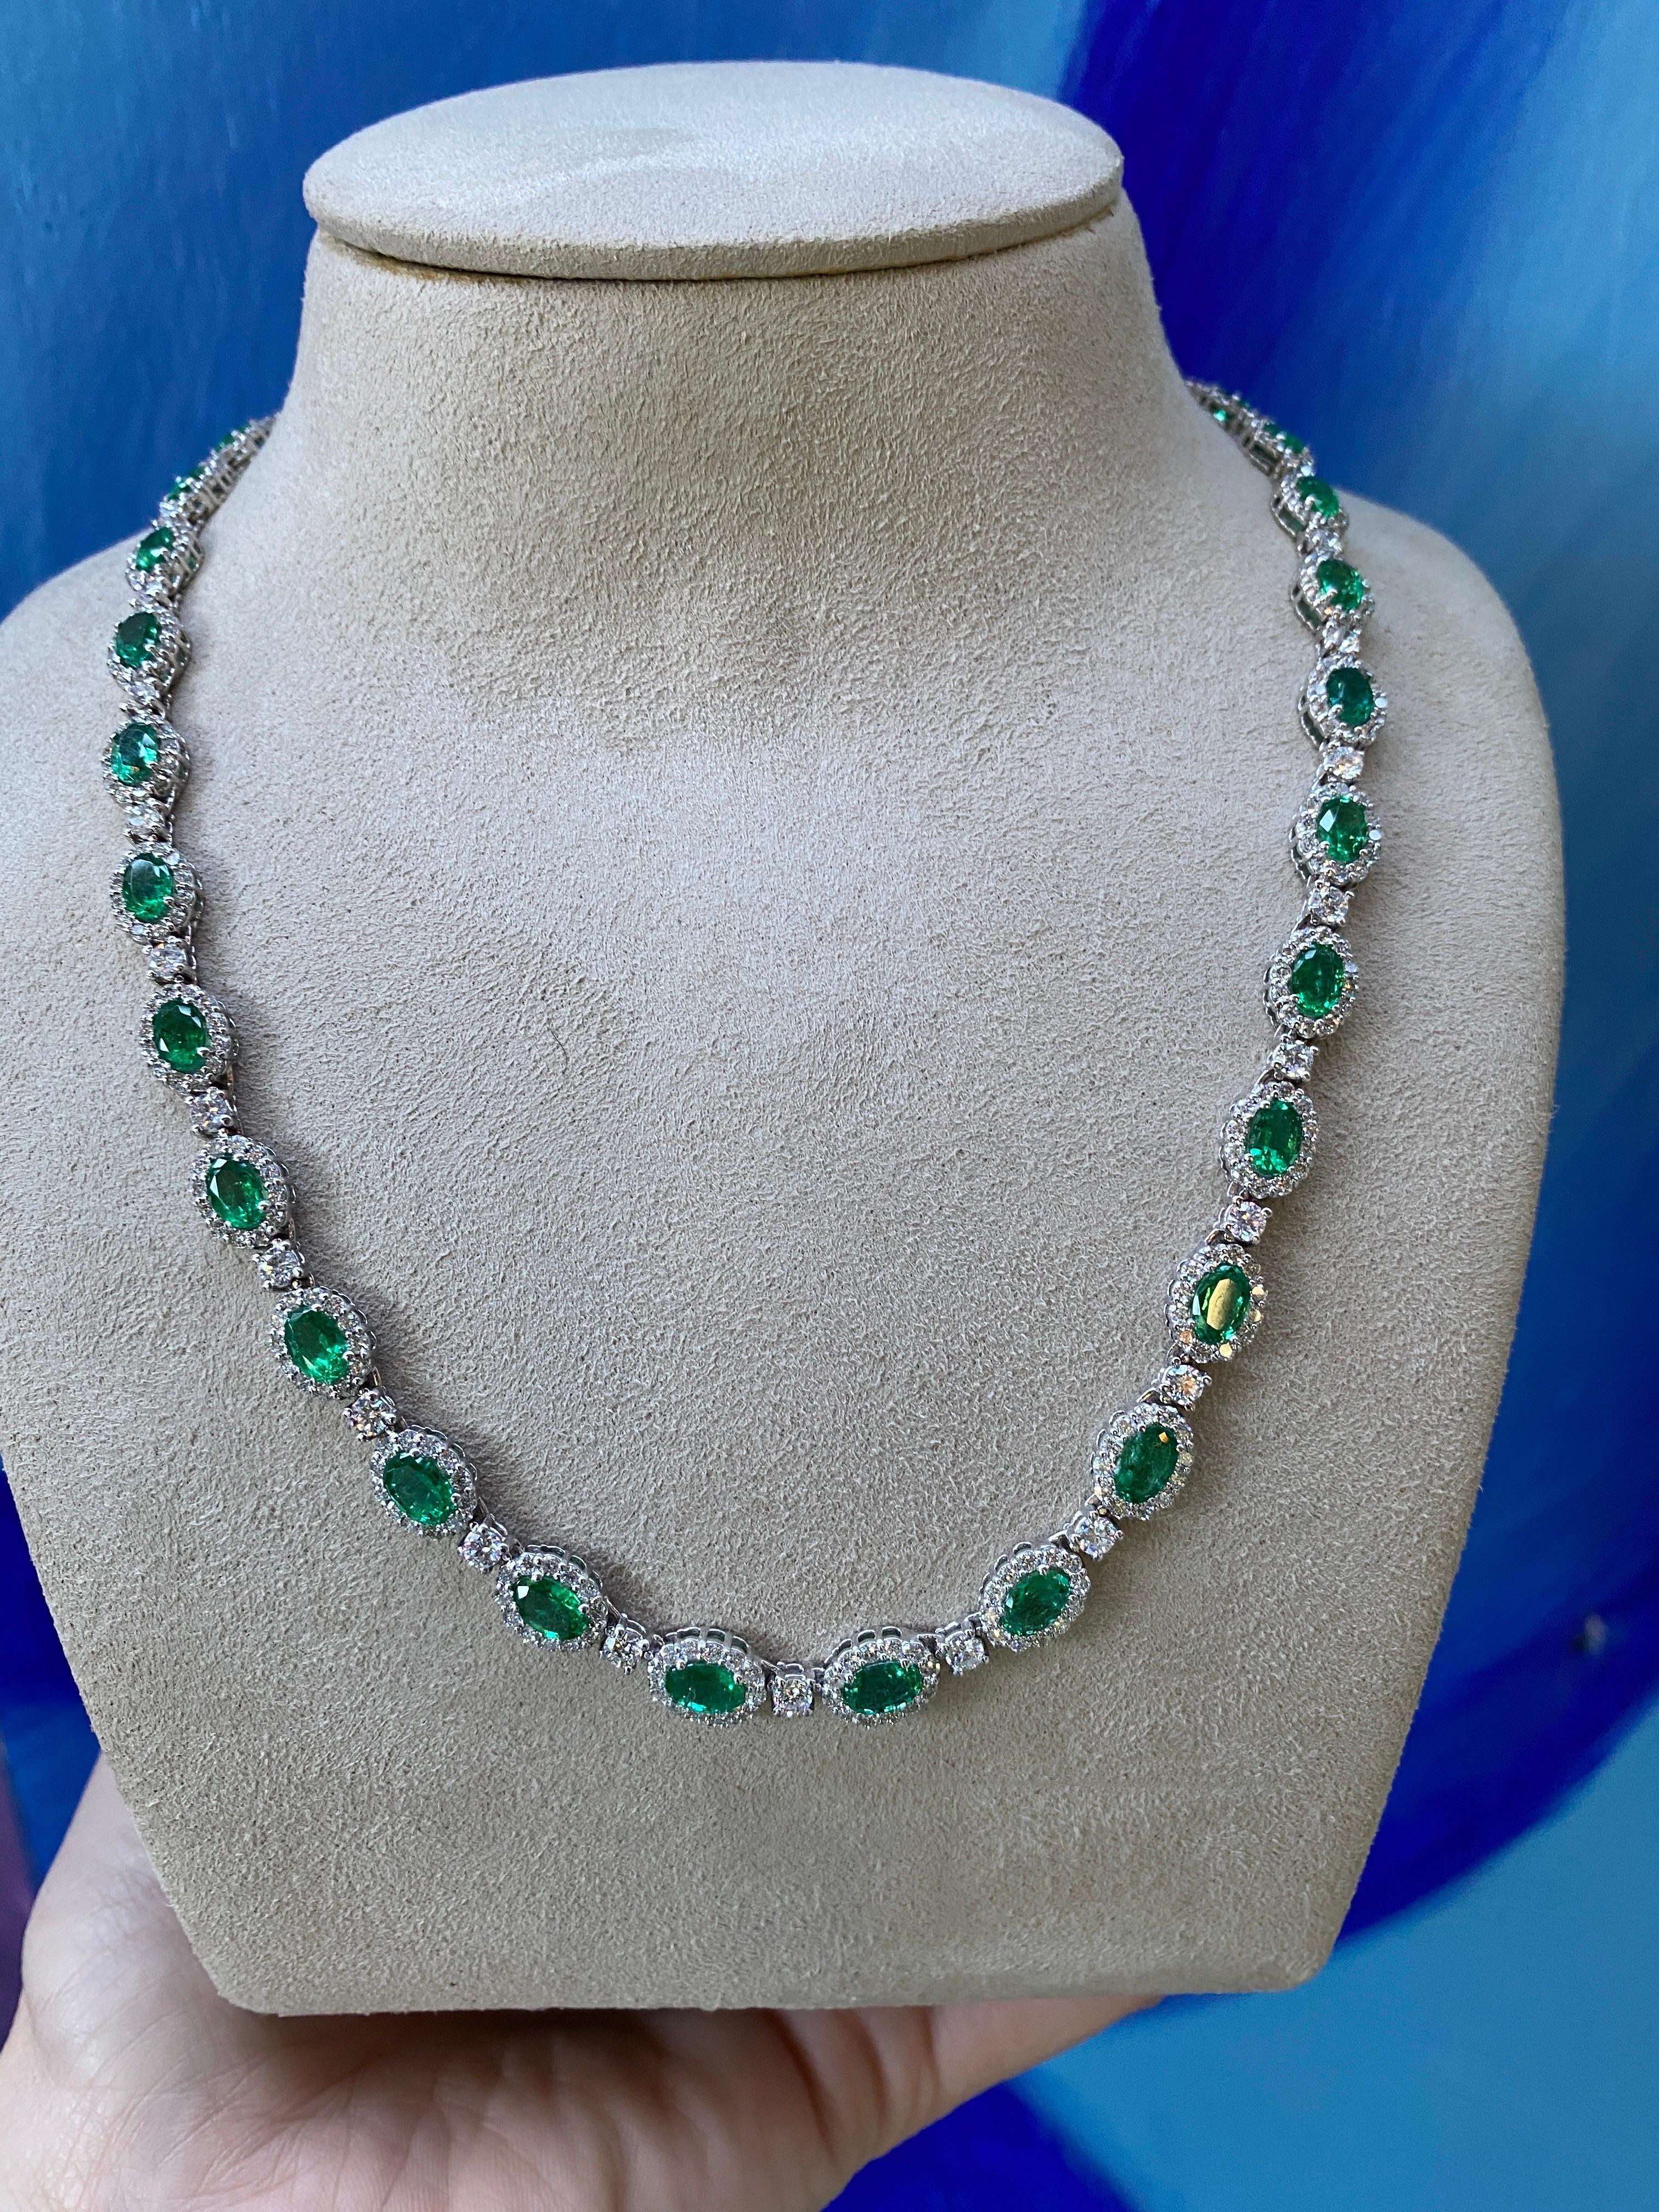 14.12 Carat Total Weight Oval Cut Emerald & 8.66ctw Round Diamond Necklace For Sale 2